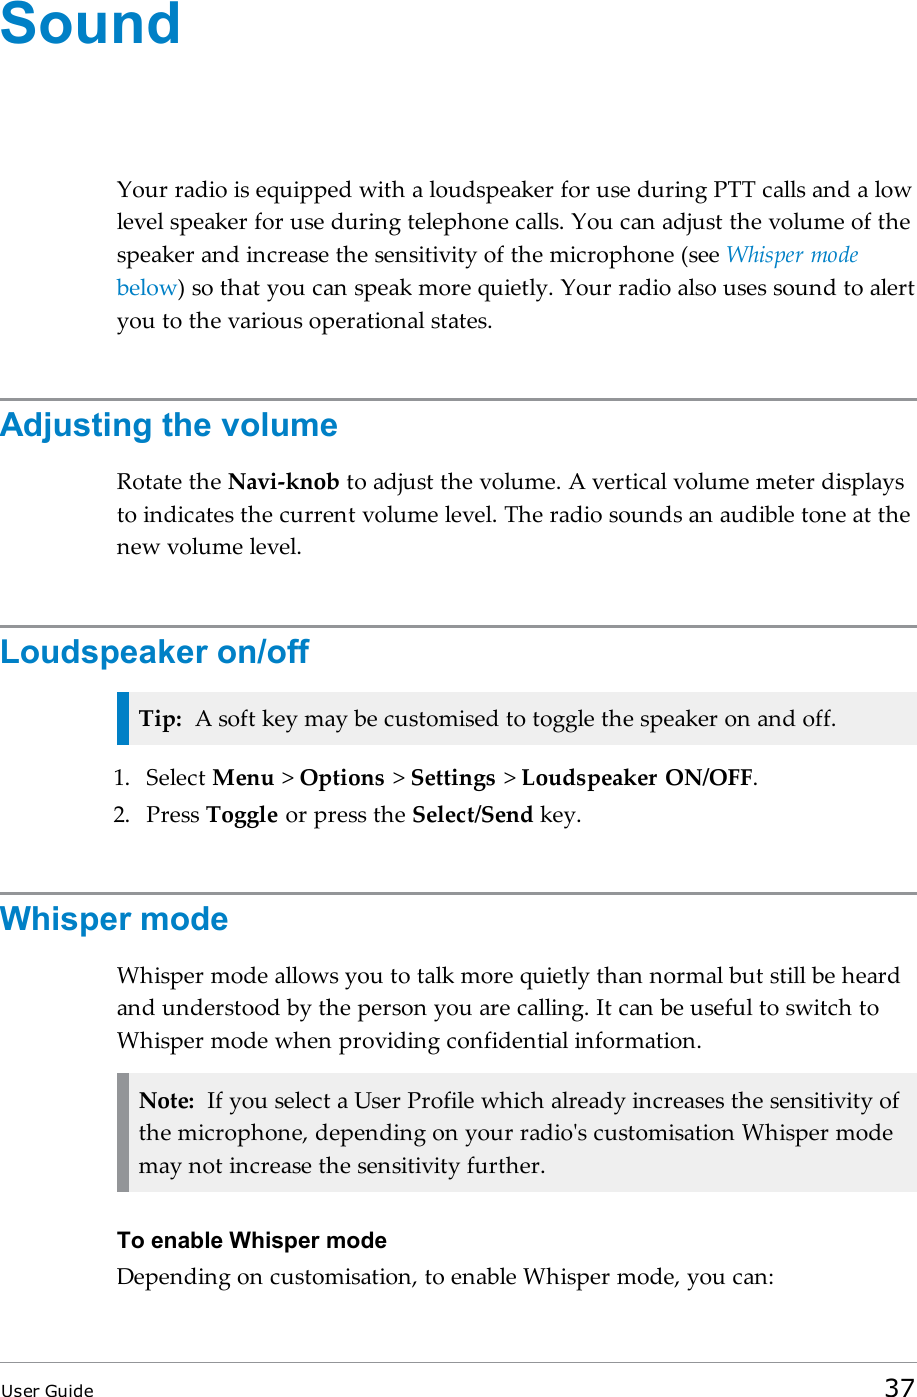 SoundYour radio is equipped with a loudspeaker for use during PTTcalls and a lowlevel speaker for use during telephone calls. You can adjust the volume of thespeaker and increase the sensitivity of the microphone (see Whisper modebelow) so that you can speak more quietly. Your radio also uses sound to alertyou to the various operational states.Adjusting the volumeRotate the Navi-knob to adjust the volume. A vertical volume meter displaysto indicates the current volume level. The radio sounds an audible tone at thenew volume level.Loudspeaker on/offTip: A soft key may be customised to toggle the speaker on and off.1. Select Menu &gt;Options &gt;Settings &gt;Loudspeaker ON/OFF.2. Press Toggle or press the Select/Send key.Whisper modeWhisper mode allows you to talk more quietly than normal but still be heardand understood by the person you are calling. It can be useful to switch toWhisper mode when providing confidential information.Note: If you select a User Profile which already increases the sensitivity ofthe microphone, depending on your radio&apos;s customisation Whisper modemay not increase the sensitivity further.To enable Whisper modeDepending on customisation, to enable Whisper mode, you can:User Guide 37